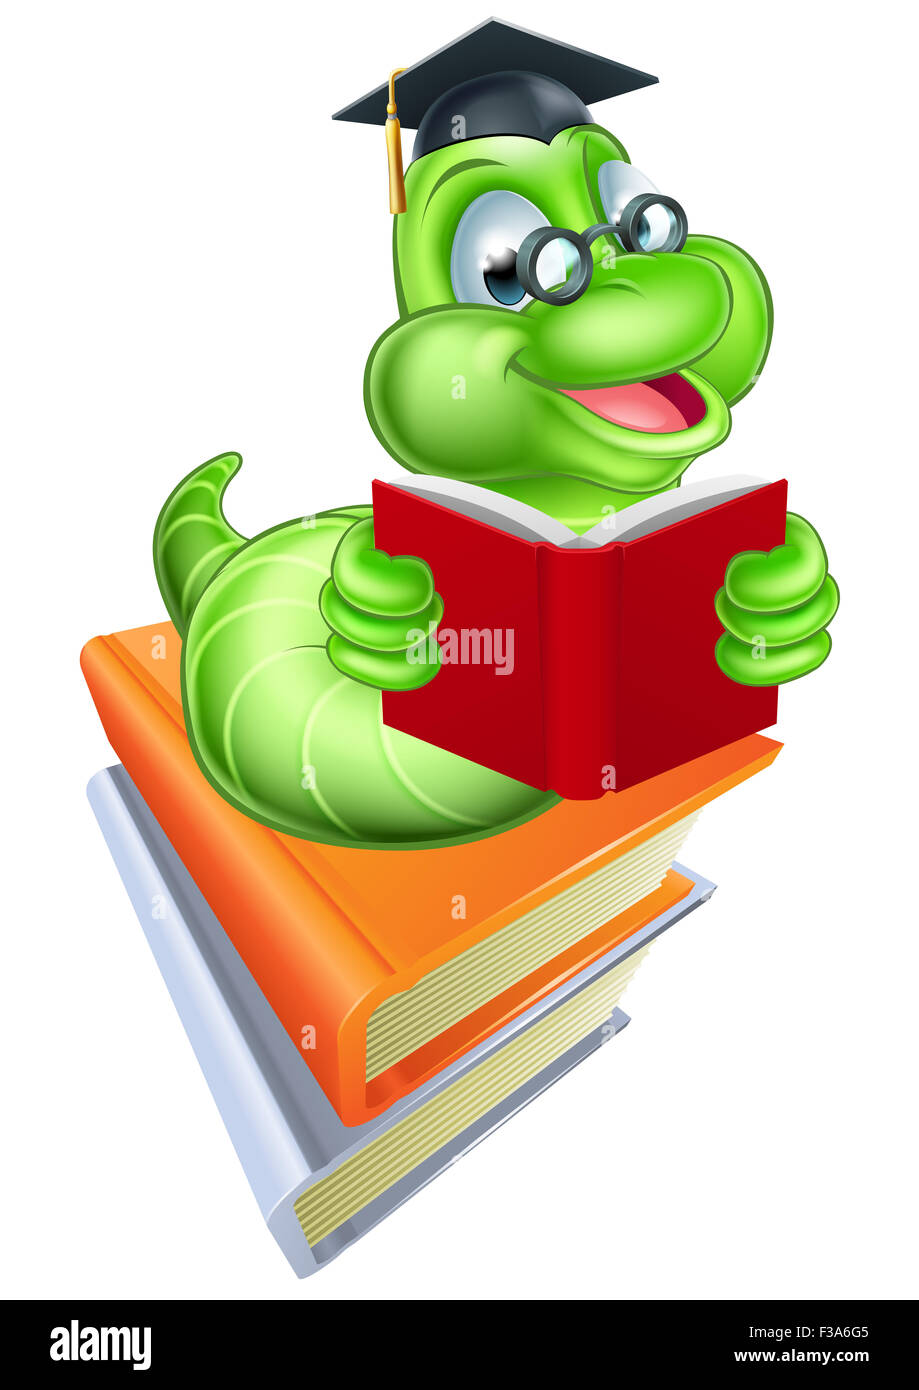 Green cartoon caterpillar worm bookworm wearing glasses and mortar board  hat reading a book Stock Photo - Alamy